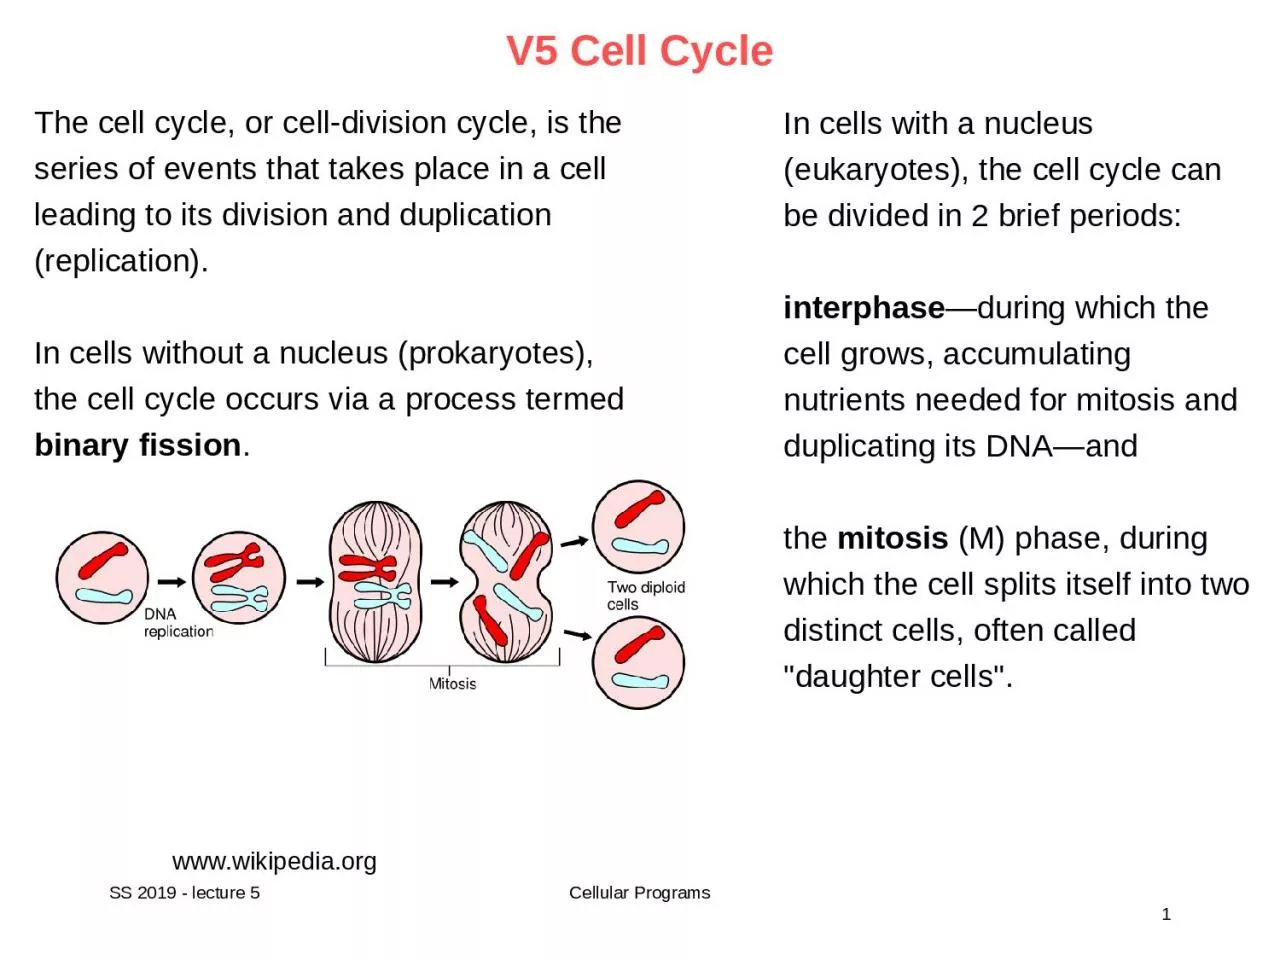 V5 Cell Cycle   www.wikipedia.org